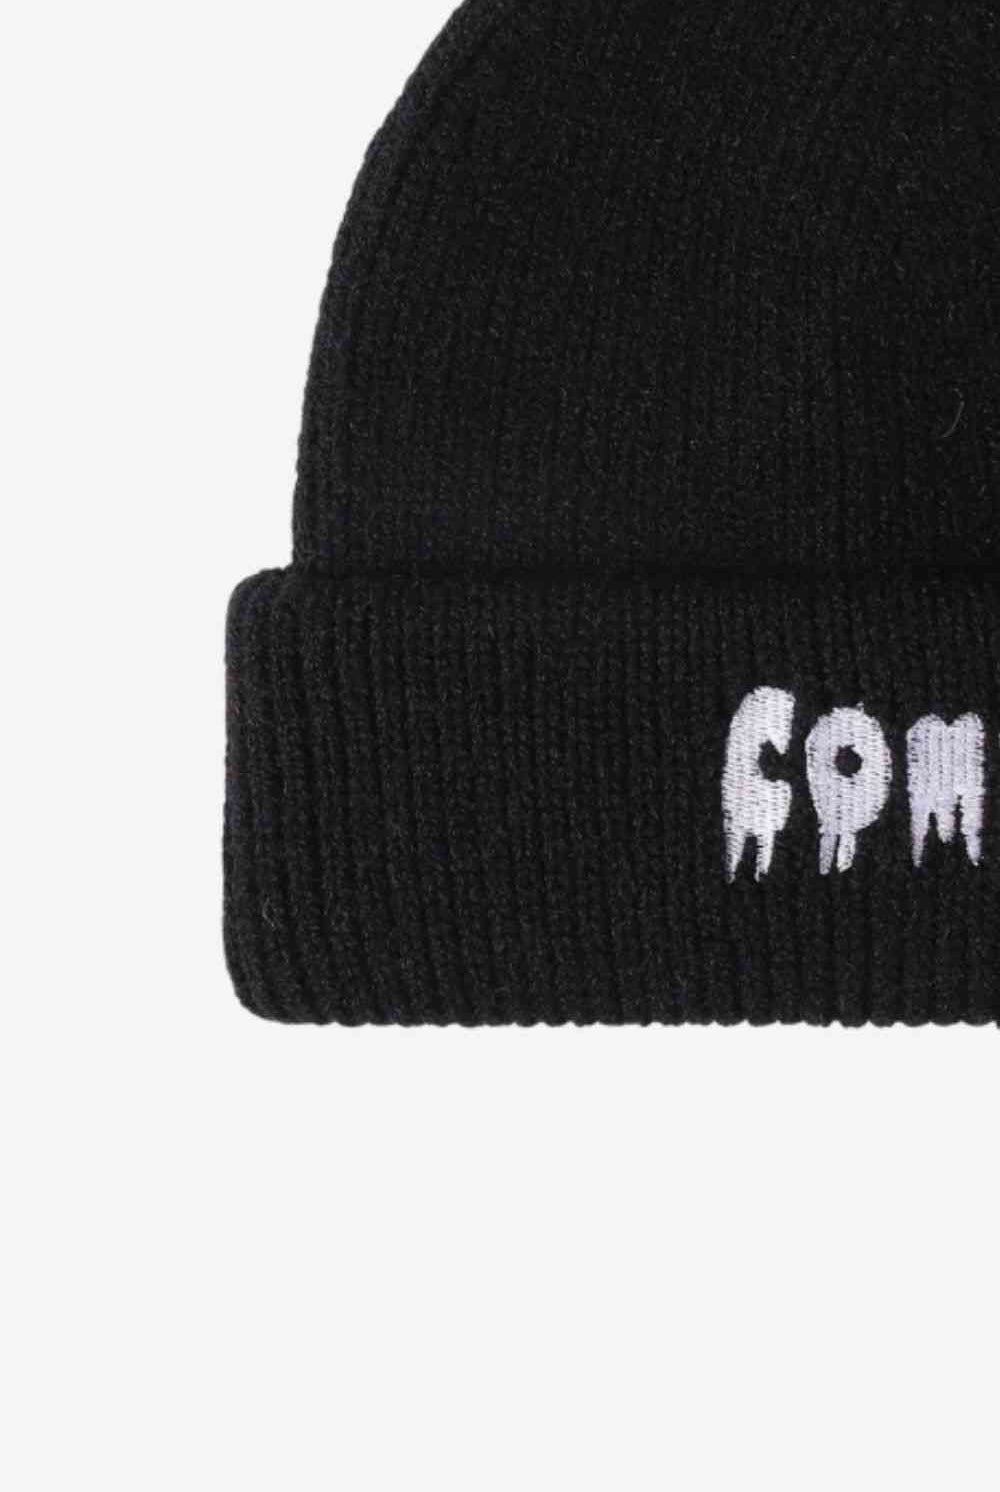 Black COME ON Embroidered Cuff Knit Beanie Winter Accessories